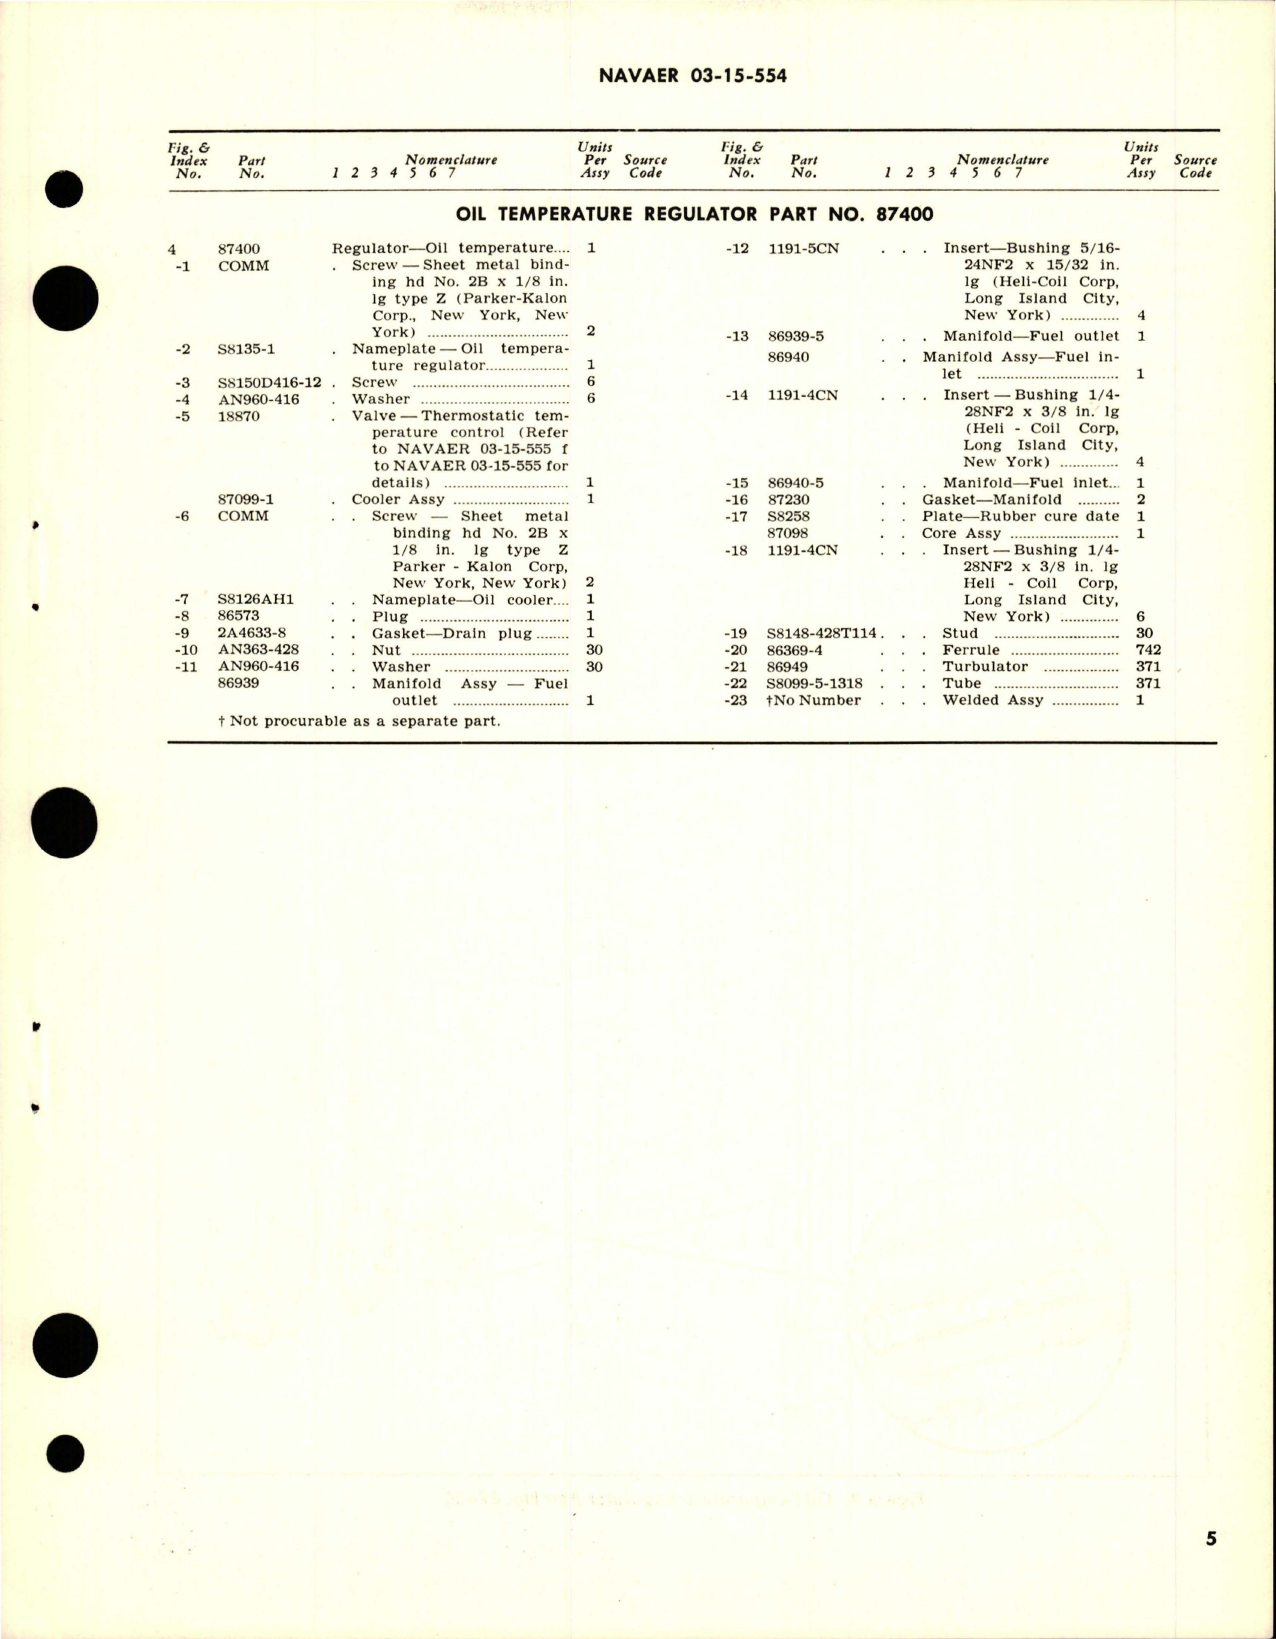 Sample page 5 from AirCorps Library document: Overhaul Instructions with Parts for Oil Temperature Regulator - 87400